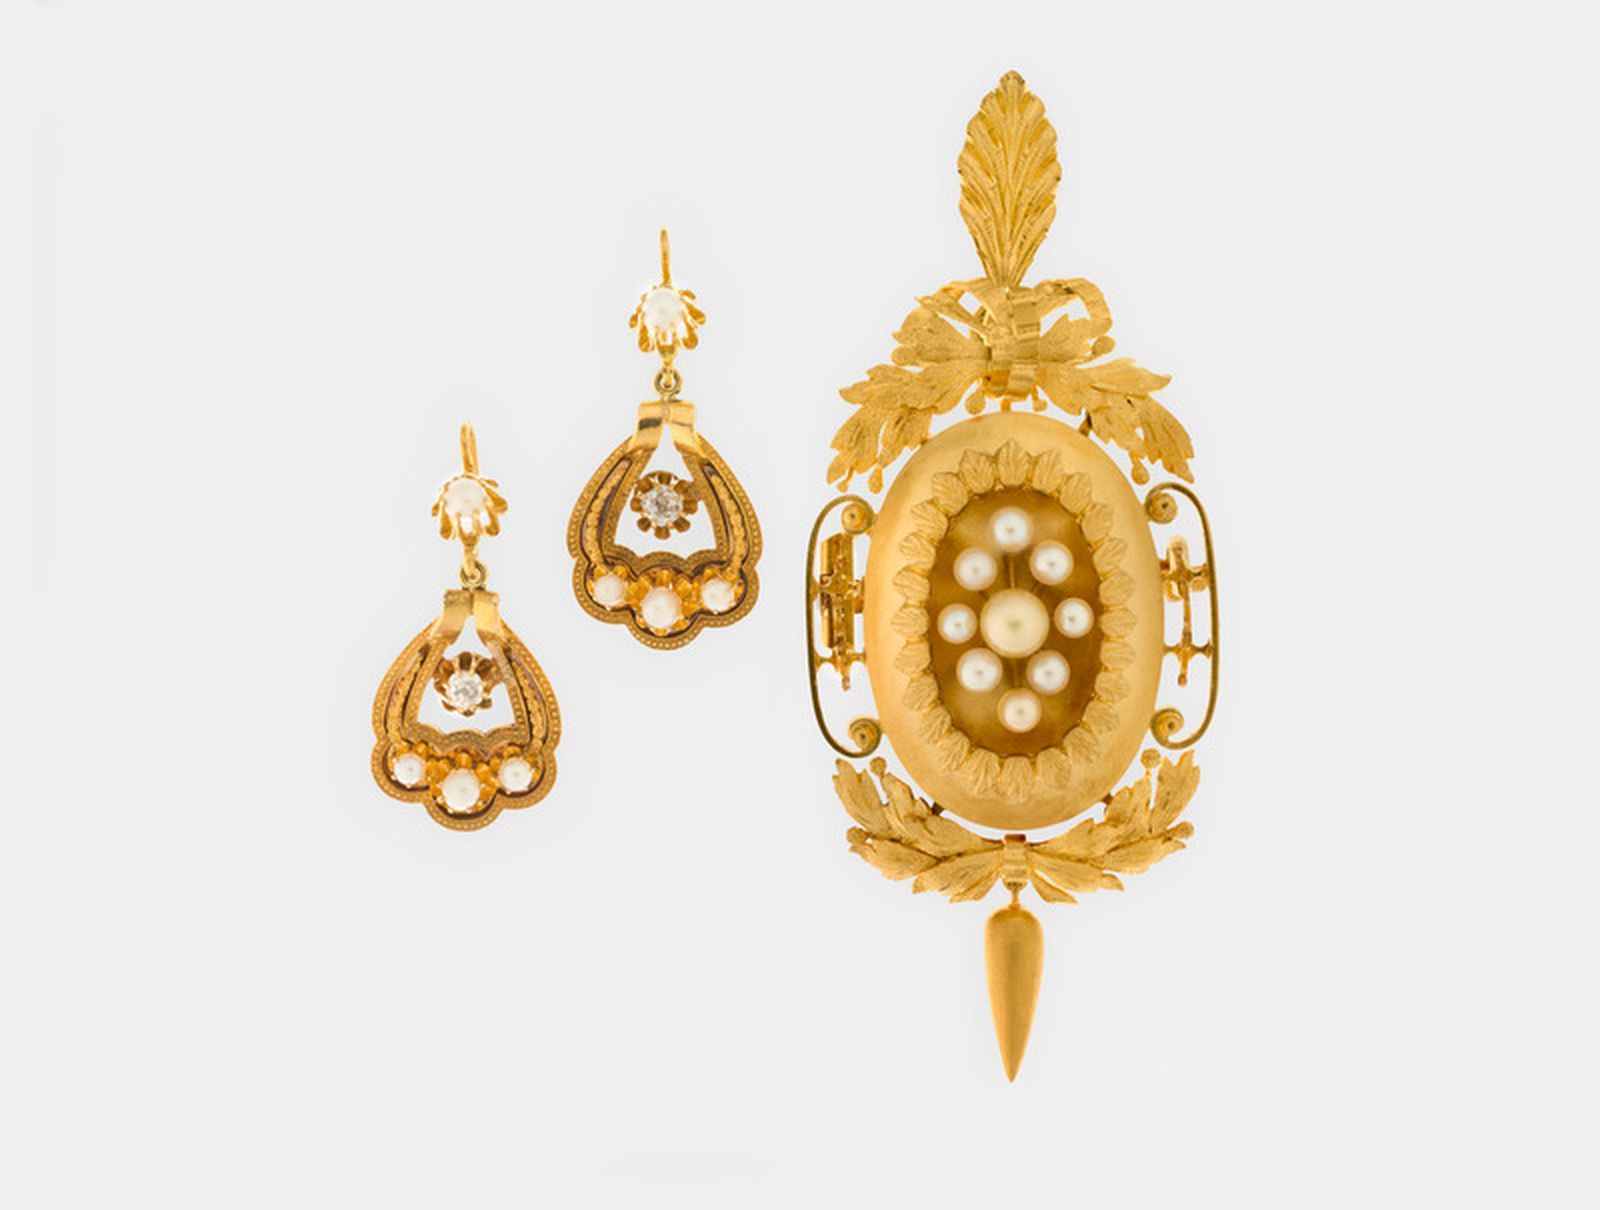 Gold jewellery inlaid with pearls